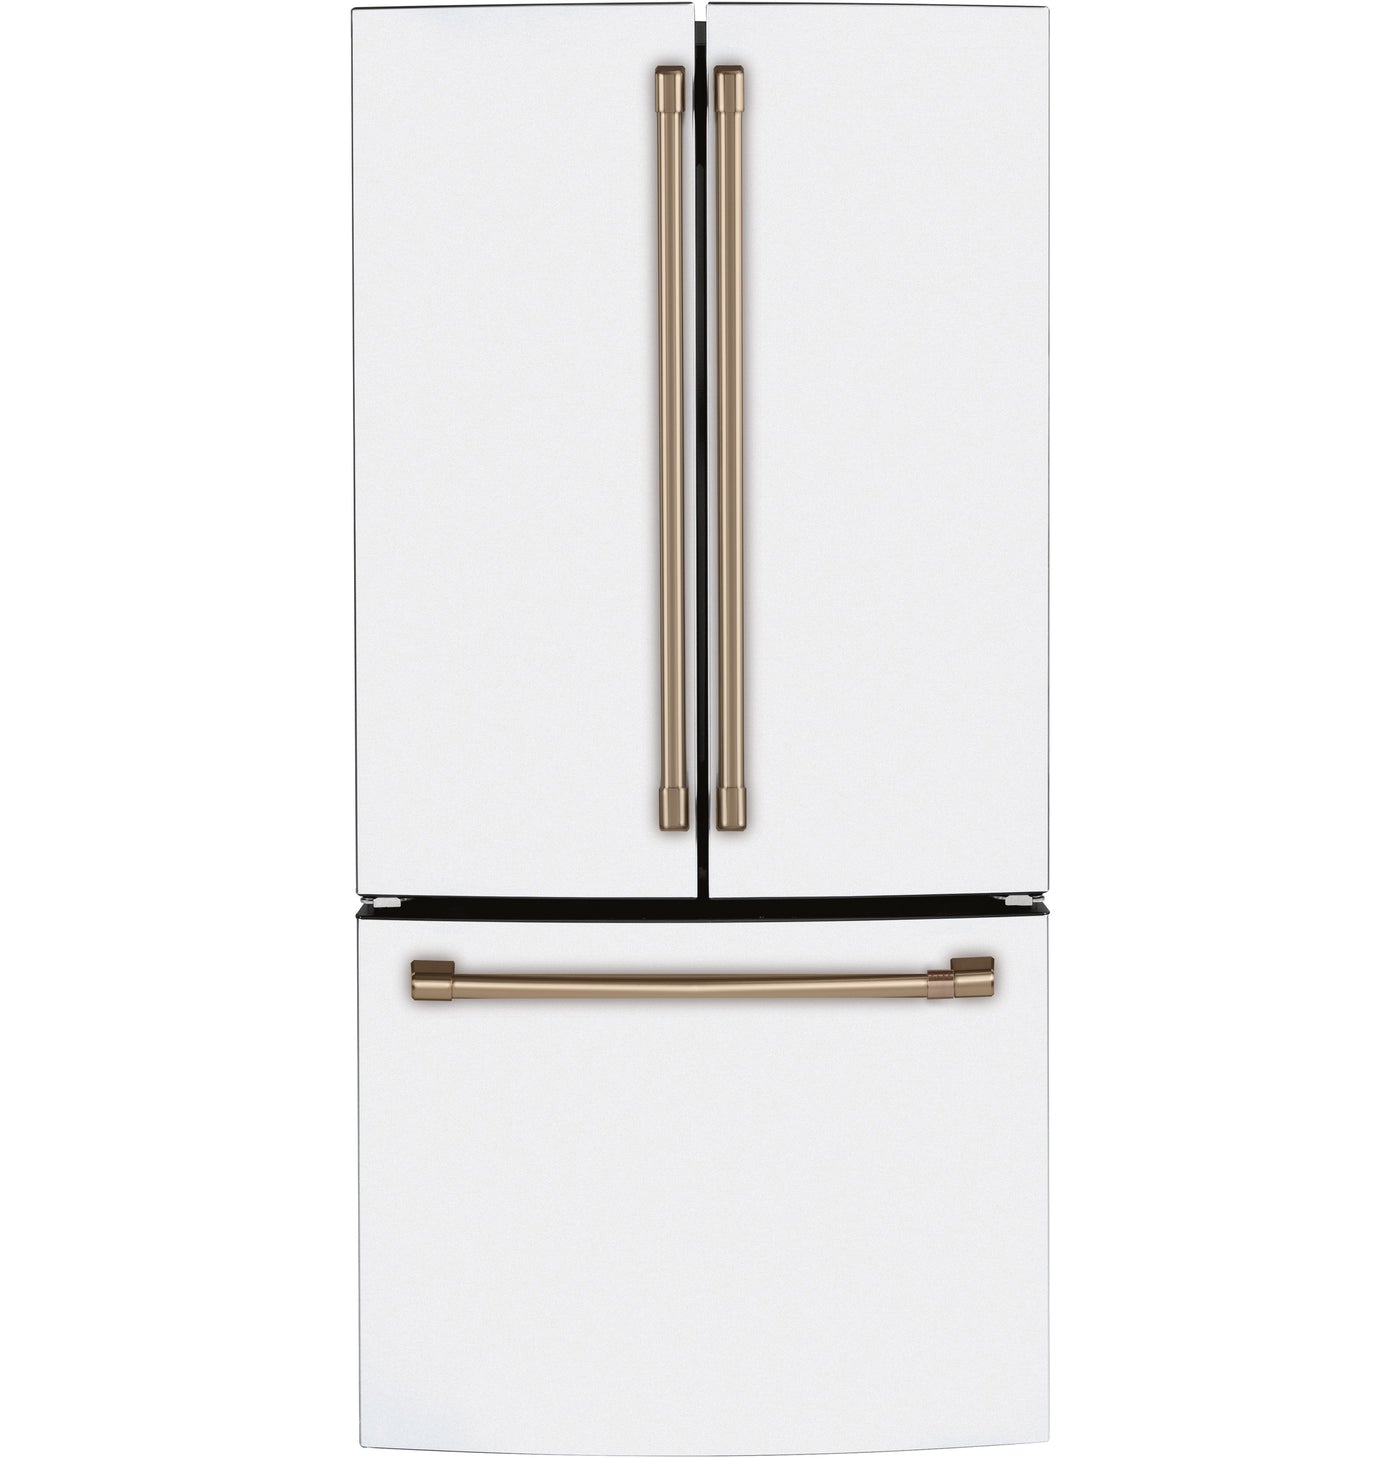 Café Matte White 33" Counter-Depth French-Door Refrigerator (18.6 Cu. Ft.) - CWE19SP4NW2